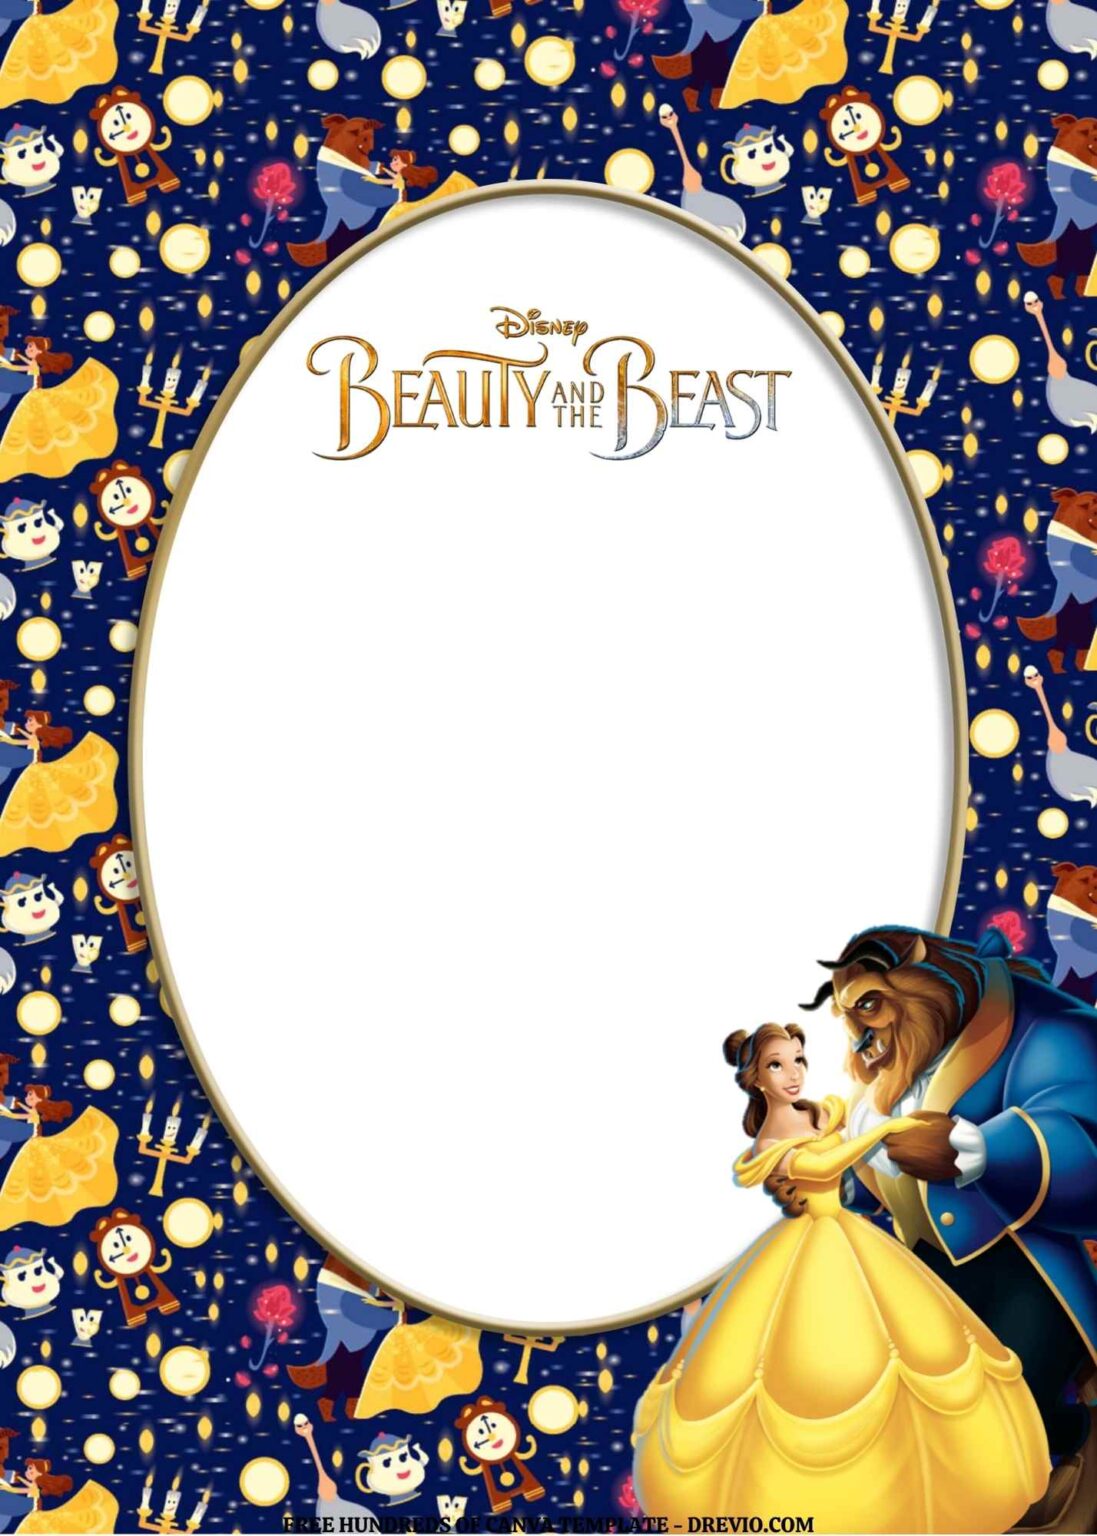 FREE EDITABLE – 18 Beauty and the Beast Canva Templates | Download ...